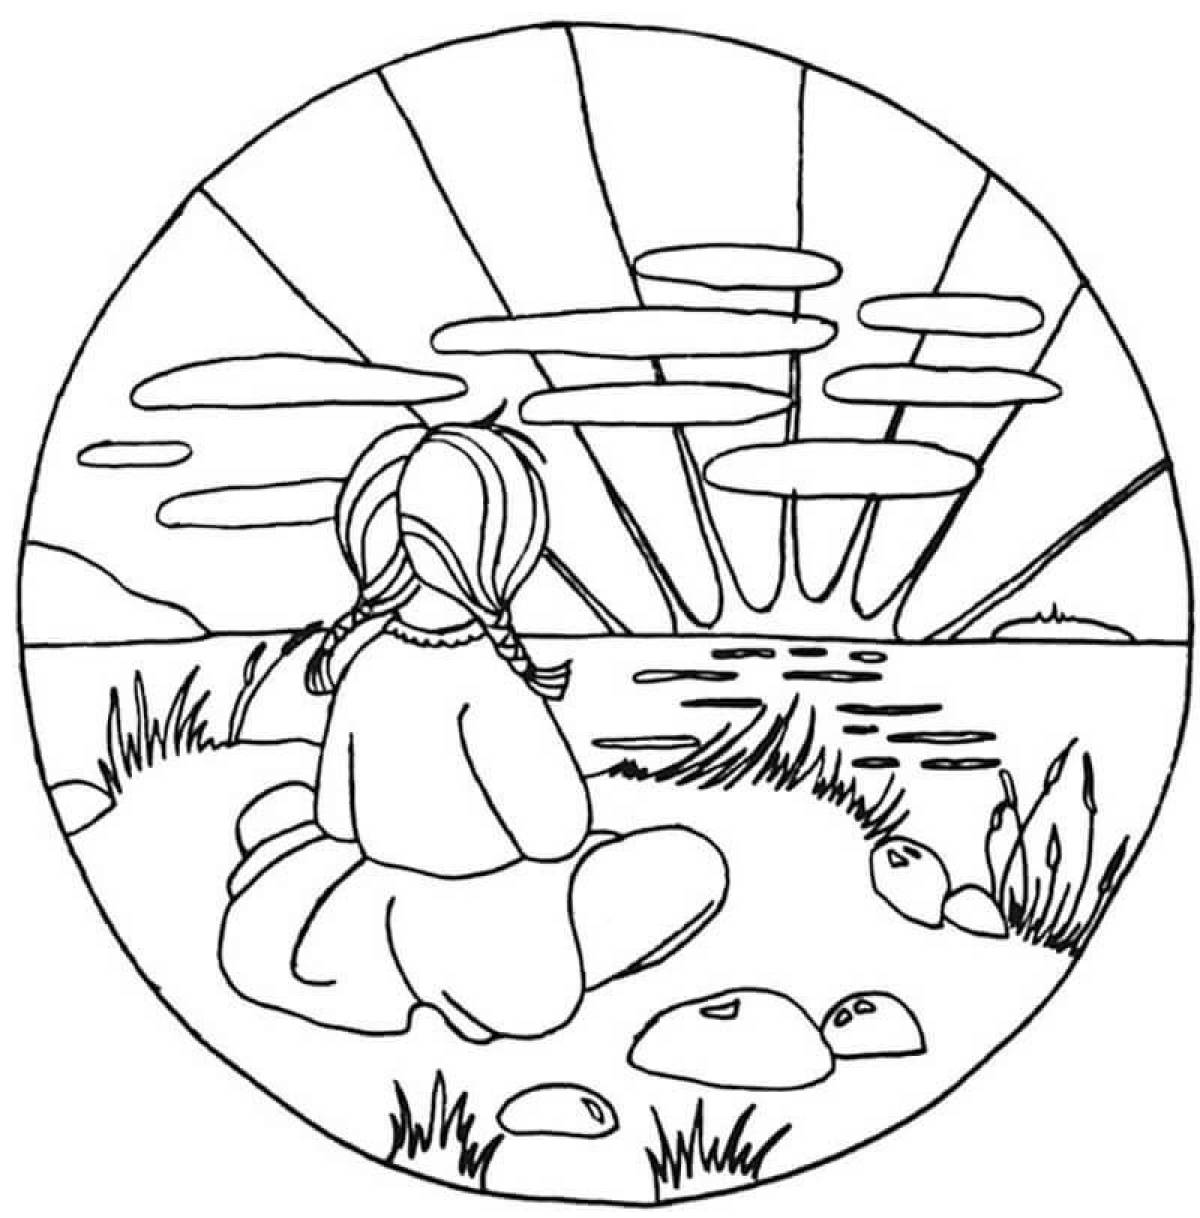 Scenic sunset coloring page